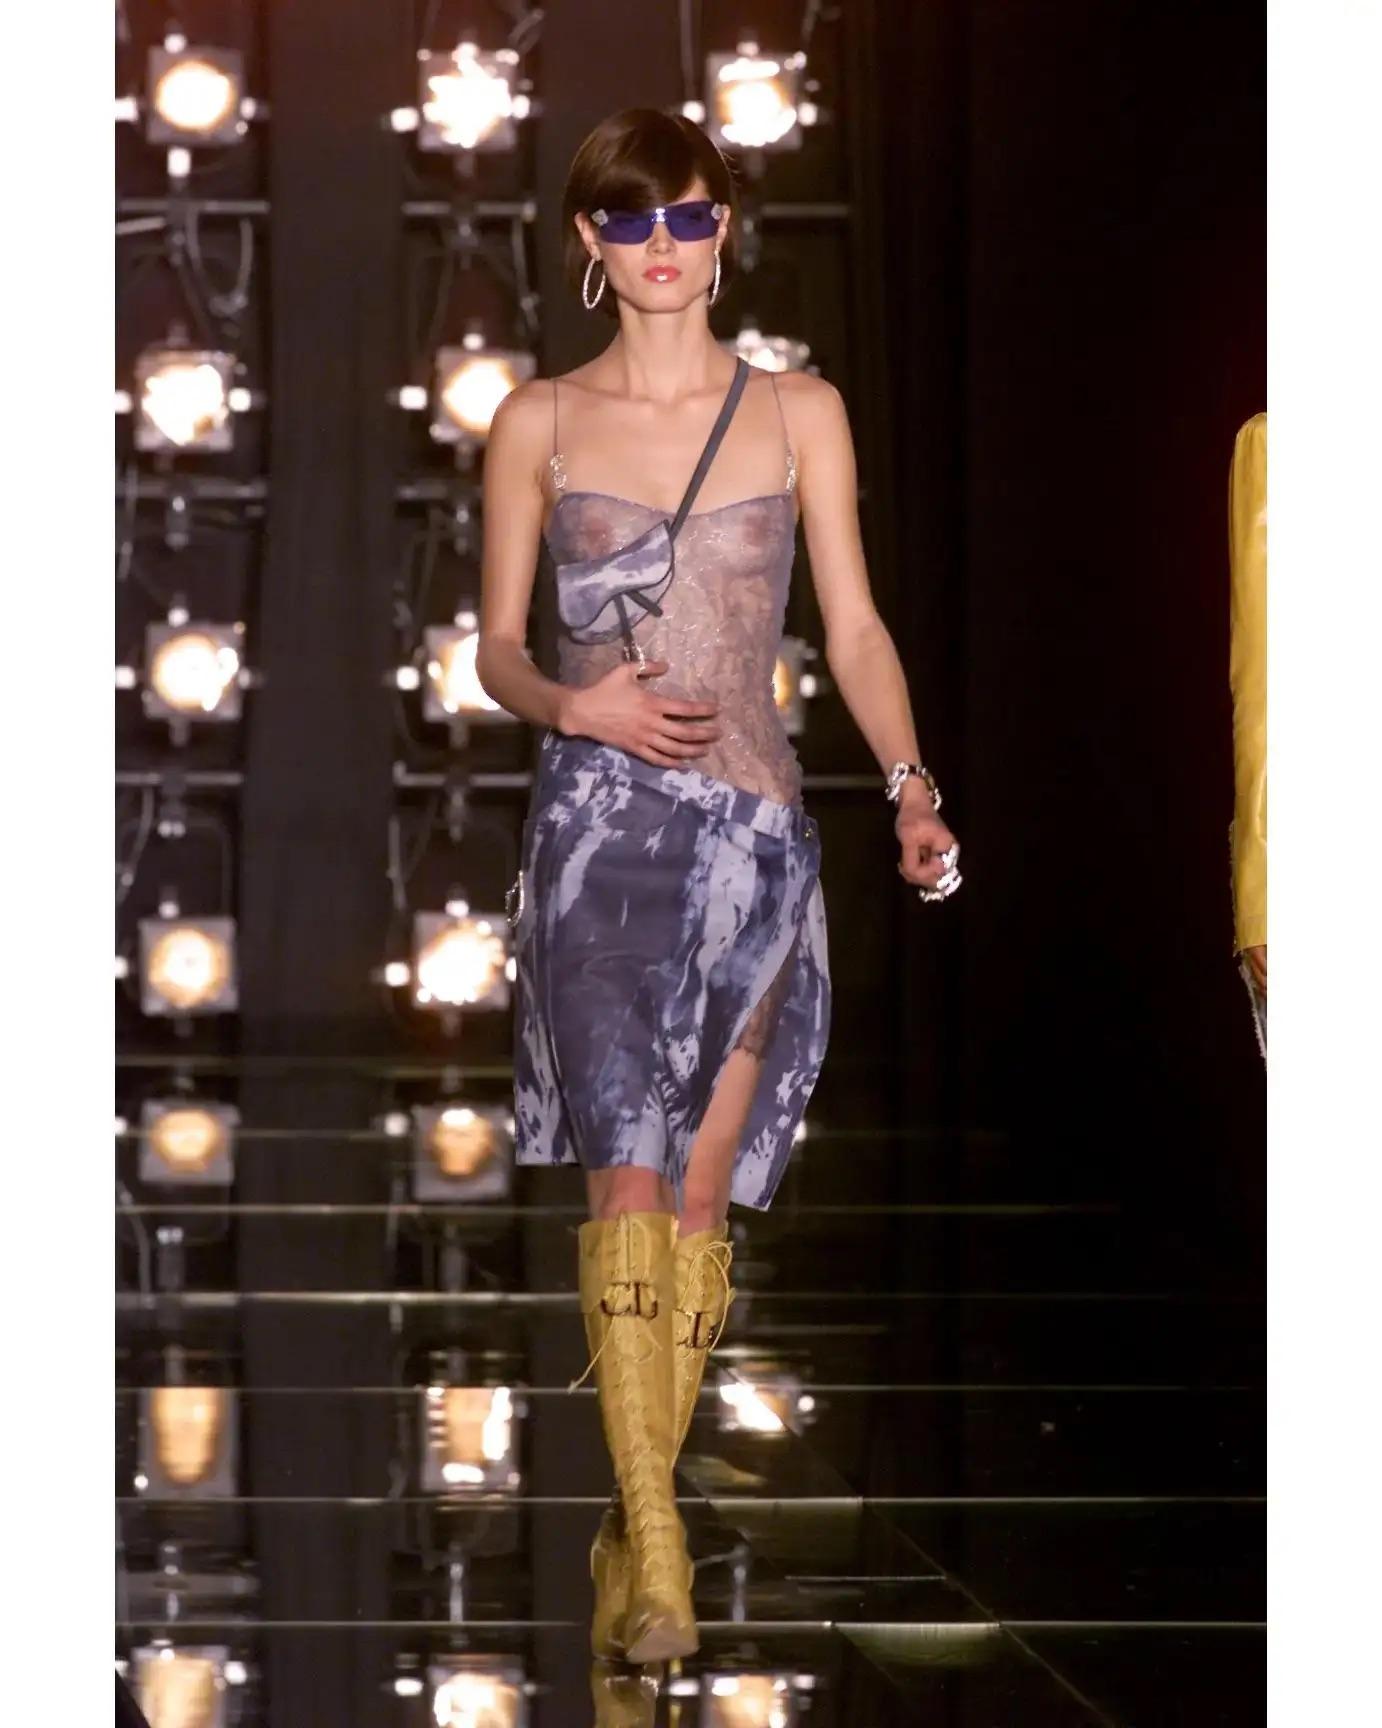 John Galliano designed this blue tie-dye Christian Dior skirt for the Spring/Summer 2000 collection. Several pieces with the same denim-like tie-dye were highlighted on the season's runway. One of Galliano's most sought-after collections at Dior,